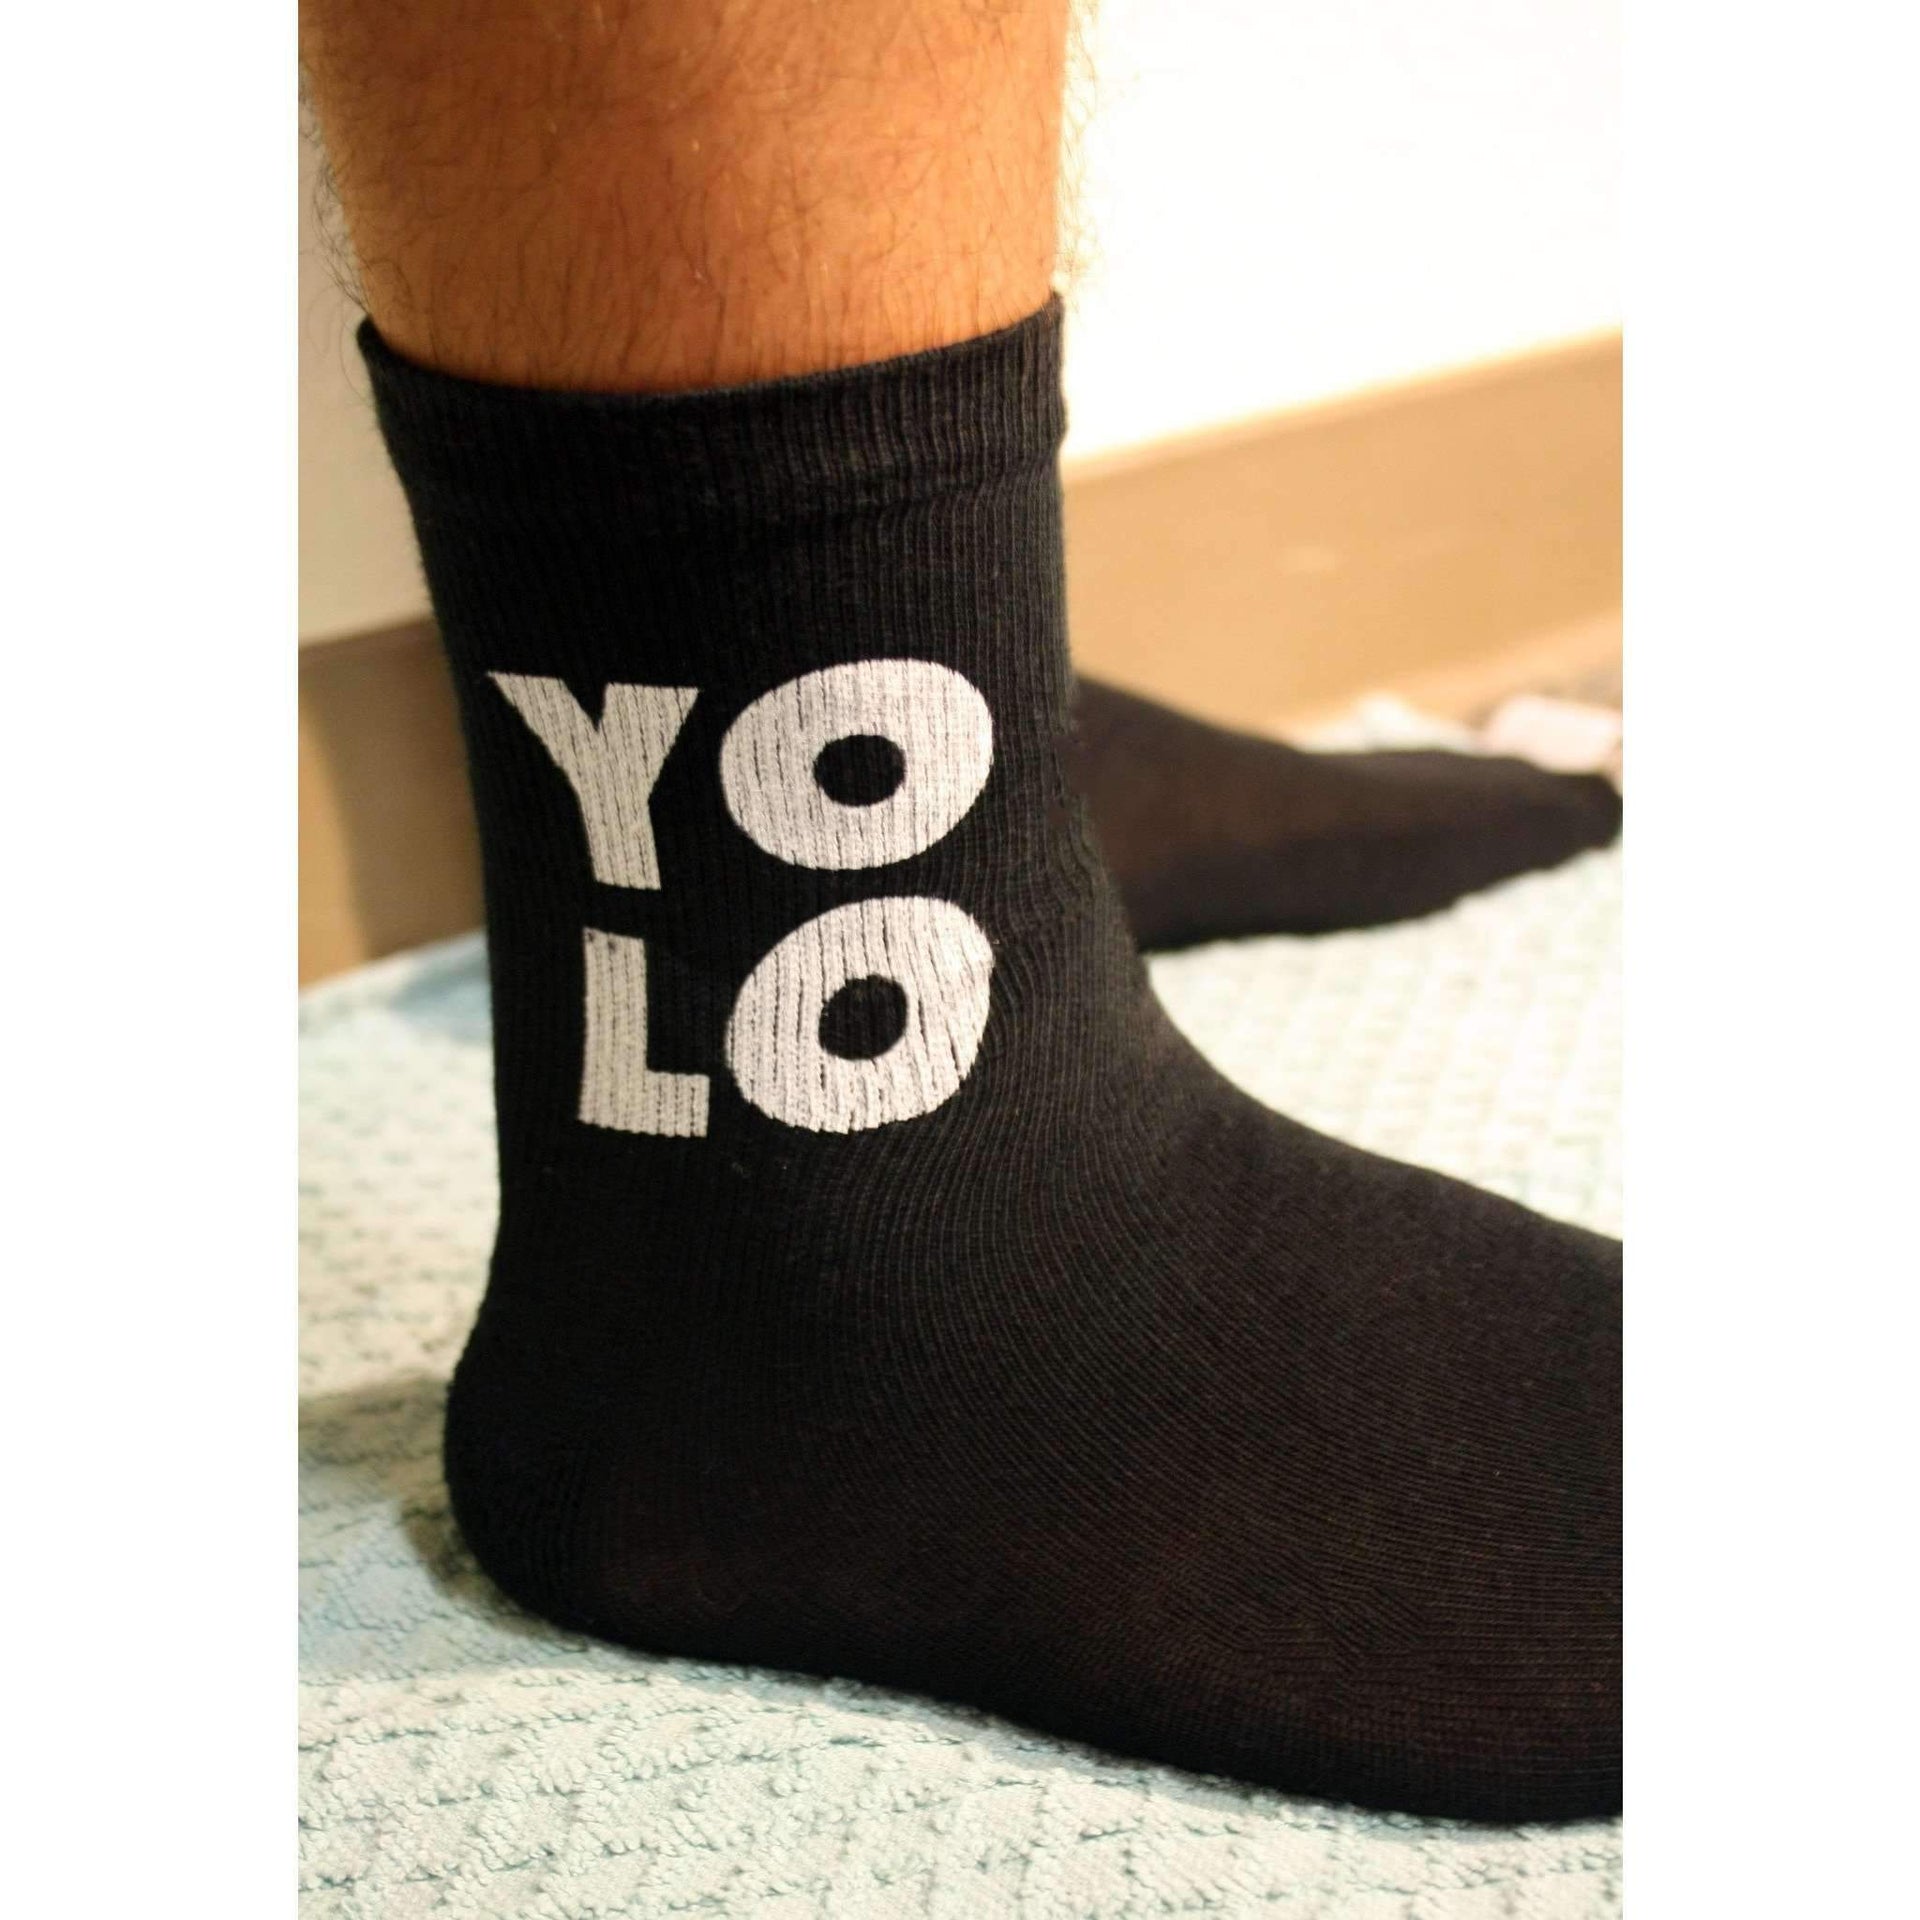 YOLO digitally printed in white ink on black cotton crew socks makes a great gift idea.